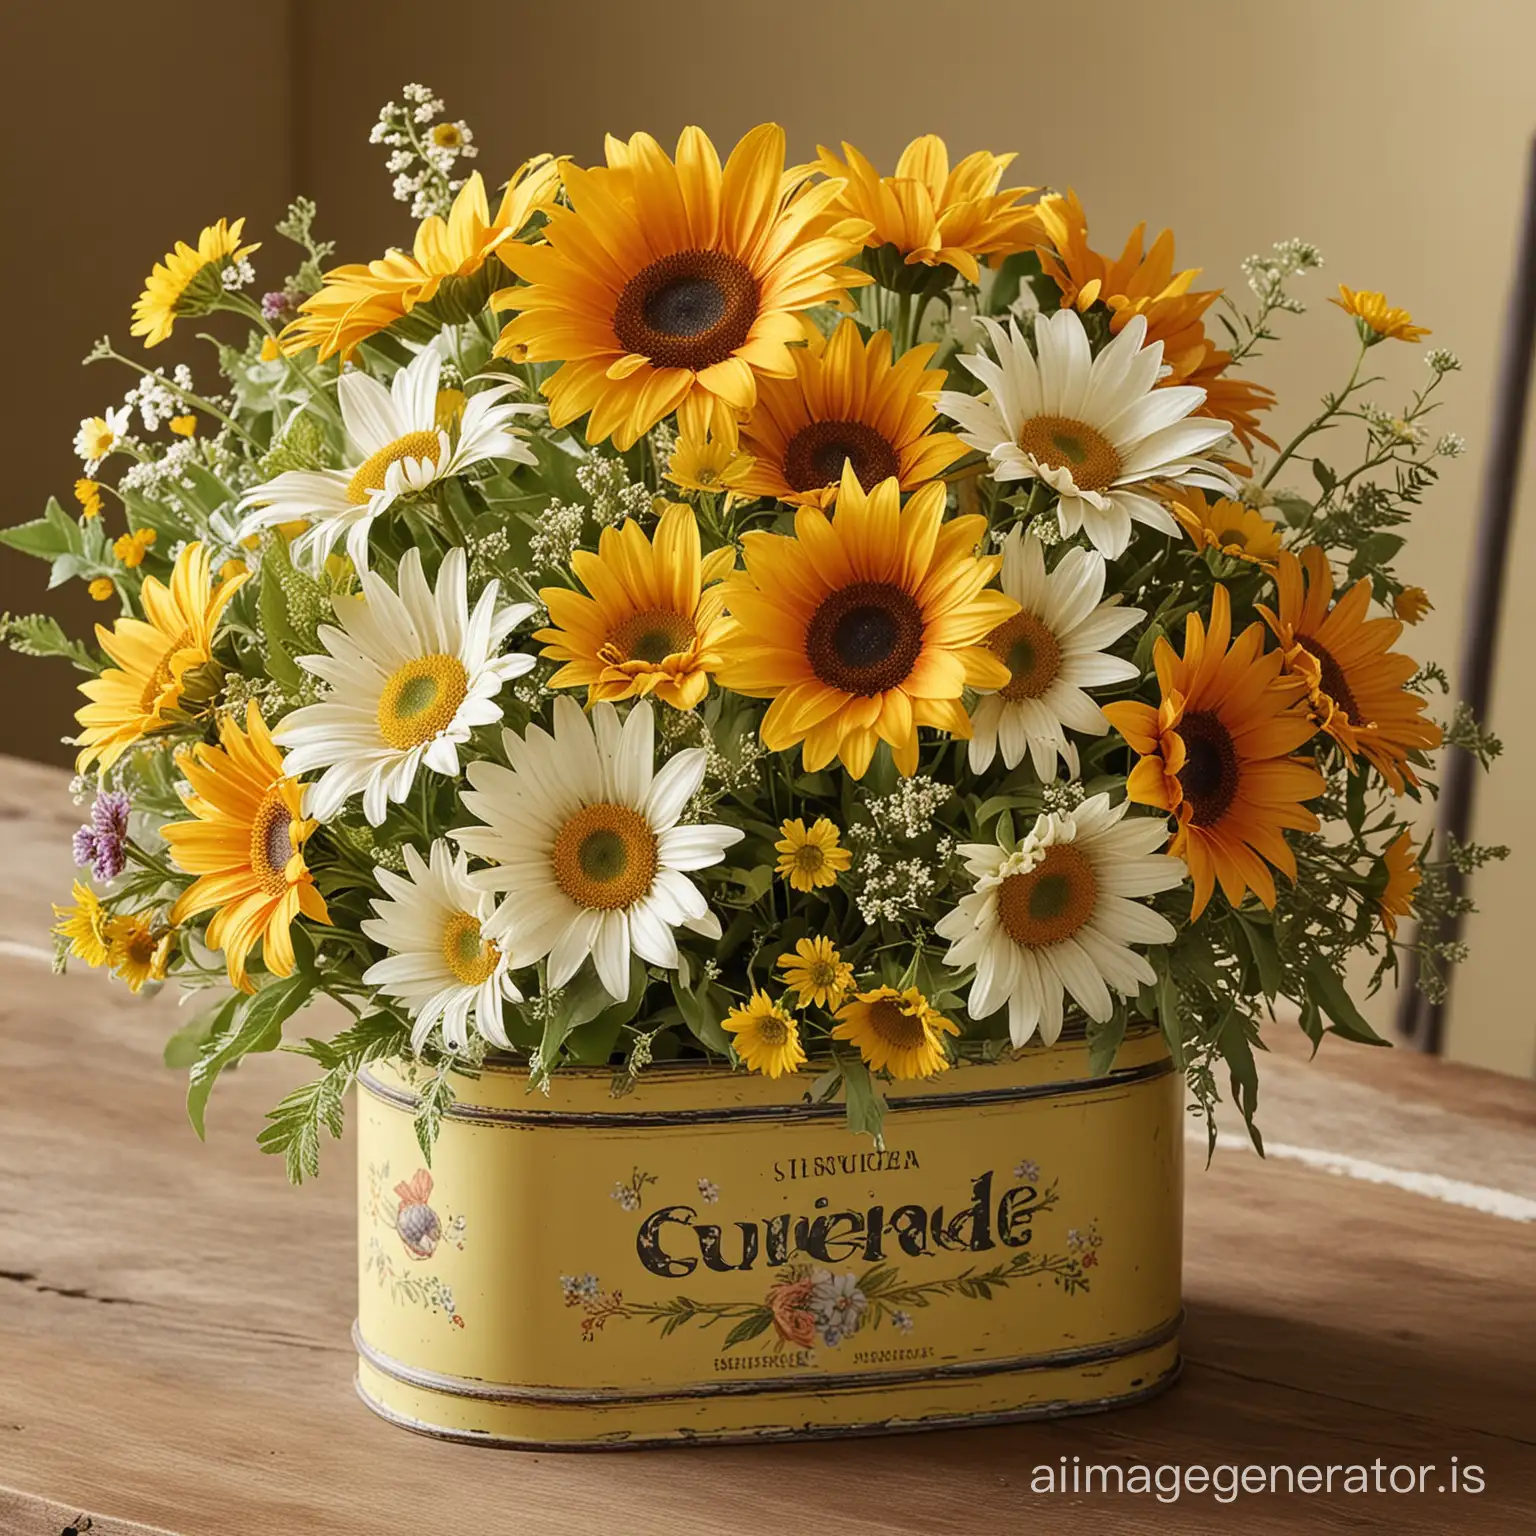 Bright daisies and a mix of wildflowers join sunflowers in a classic metal tin, offering a sunny and joyful centerpiece that exudes casual elegance. It's a blend that brings the simplicity and warmth of a country garden to your table for a vintage centerpiece